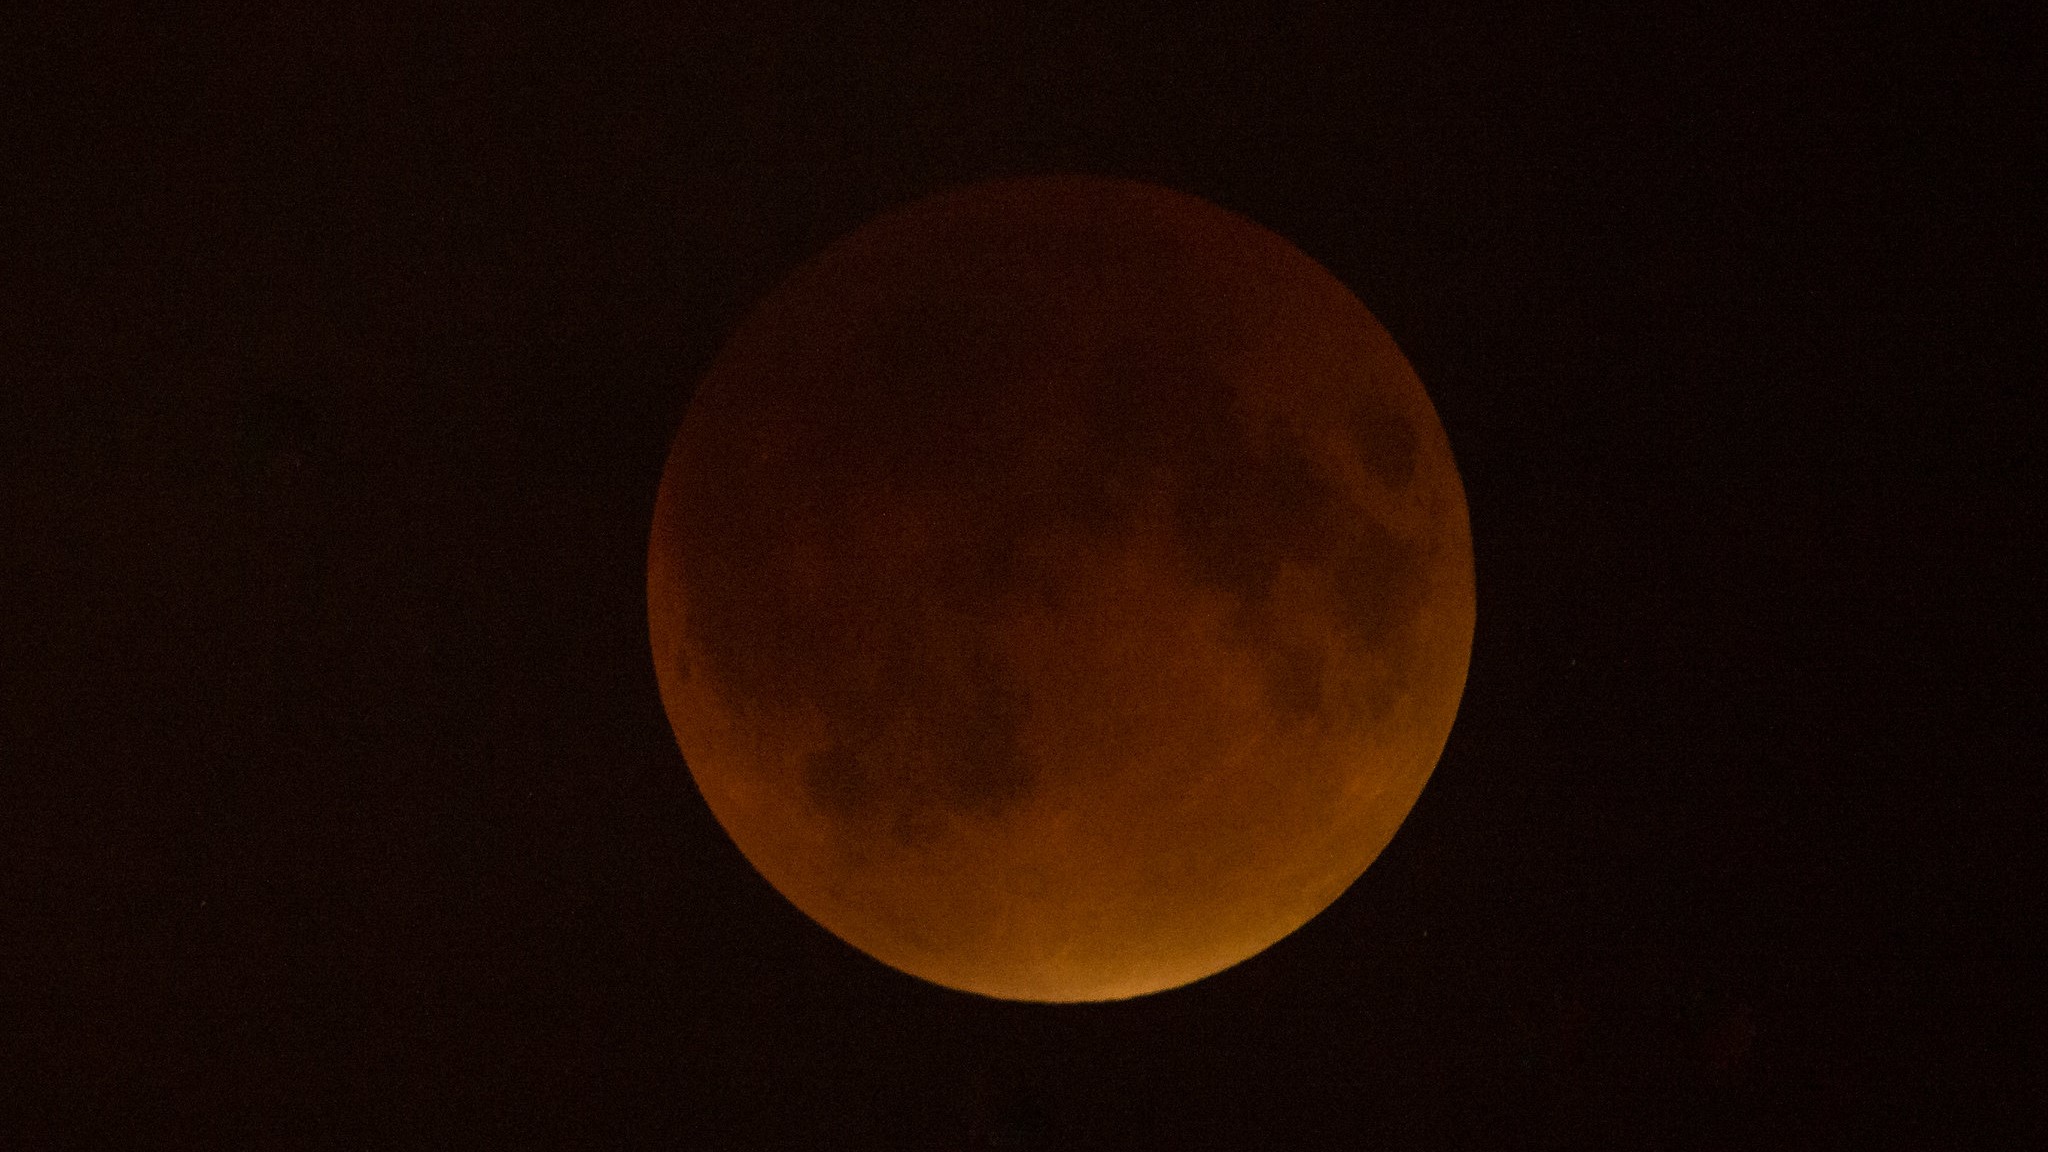 The total lunar eclipse on Sept. 27, 2015, as seen from Washington, D.C.